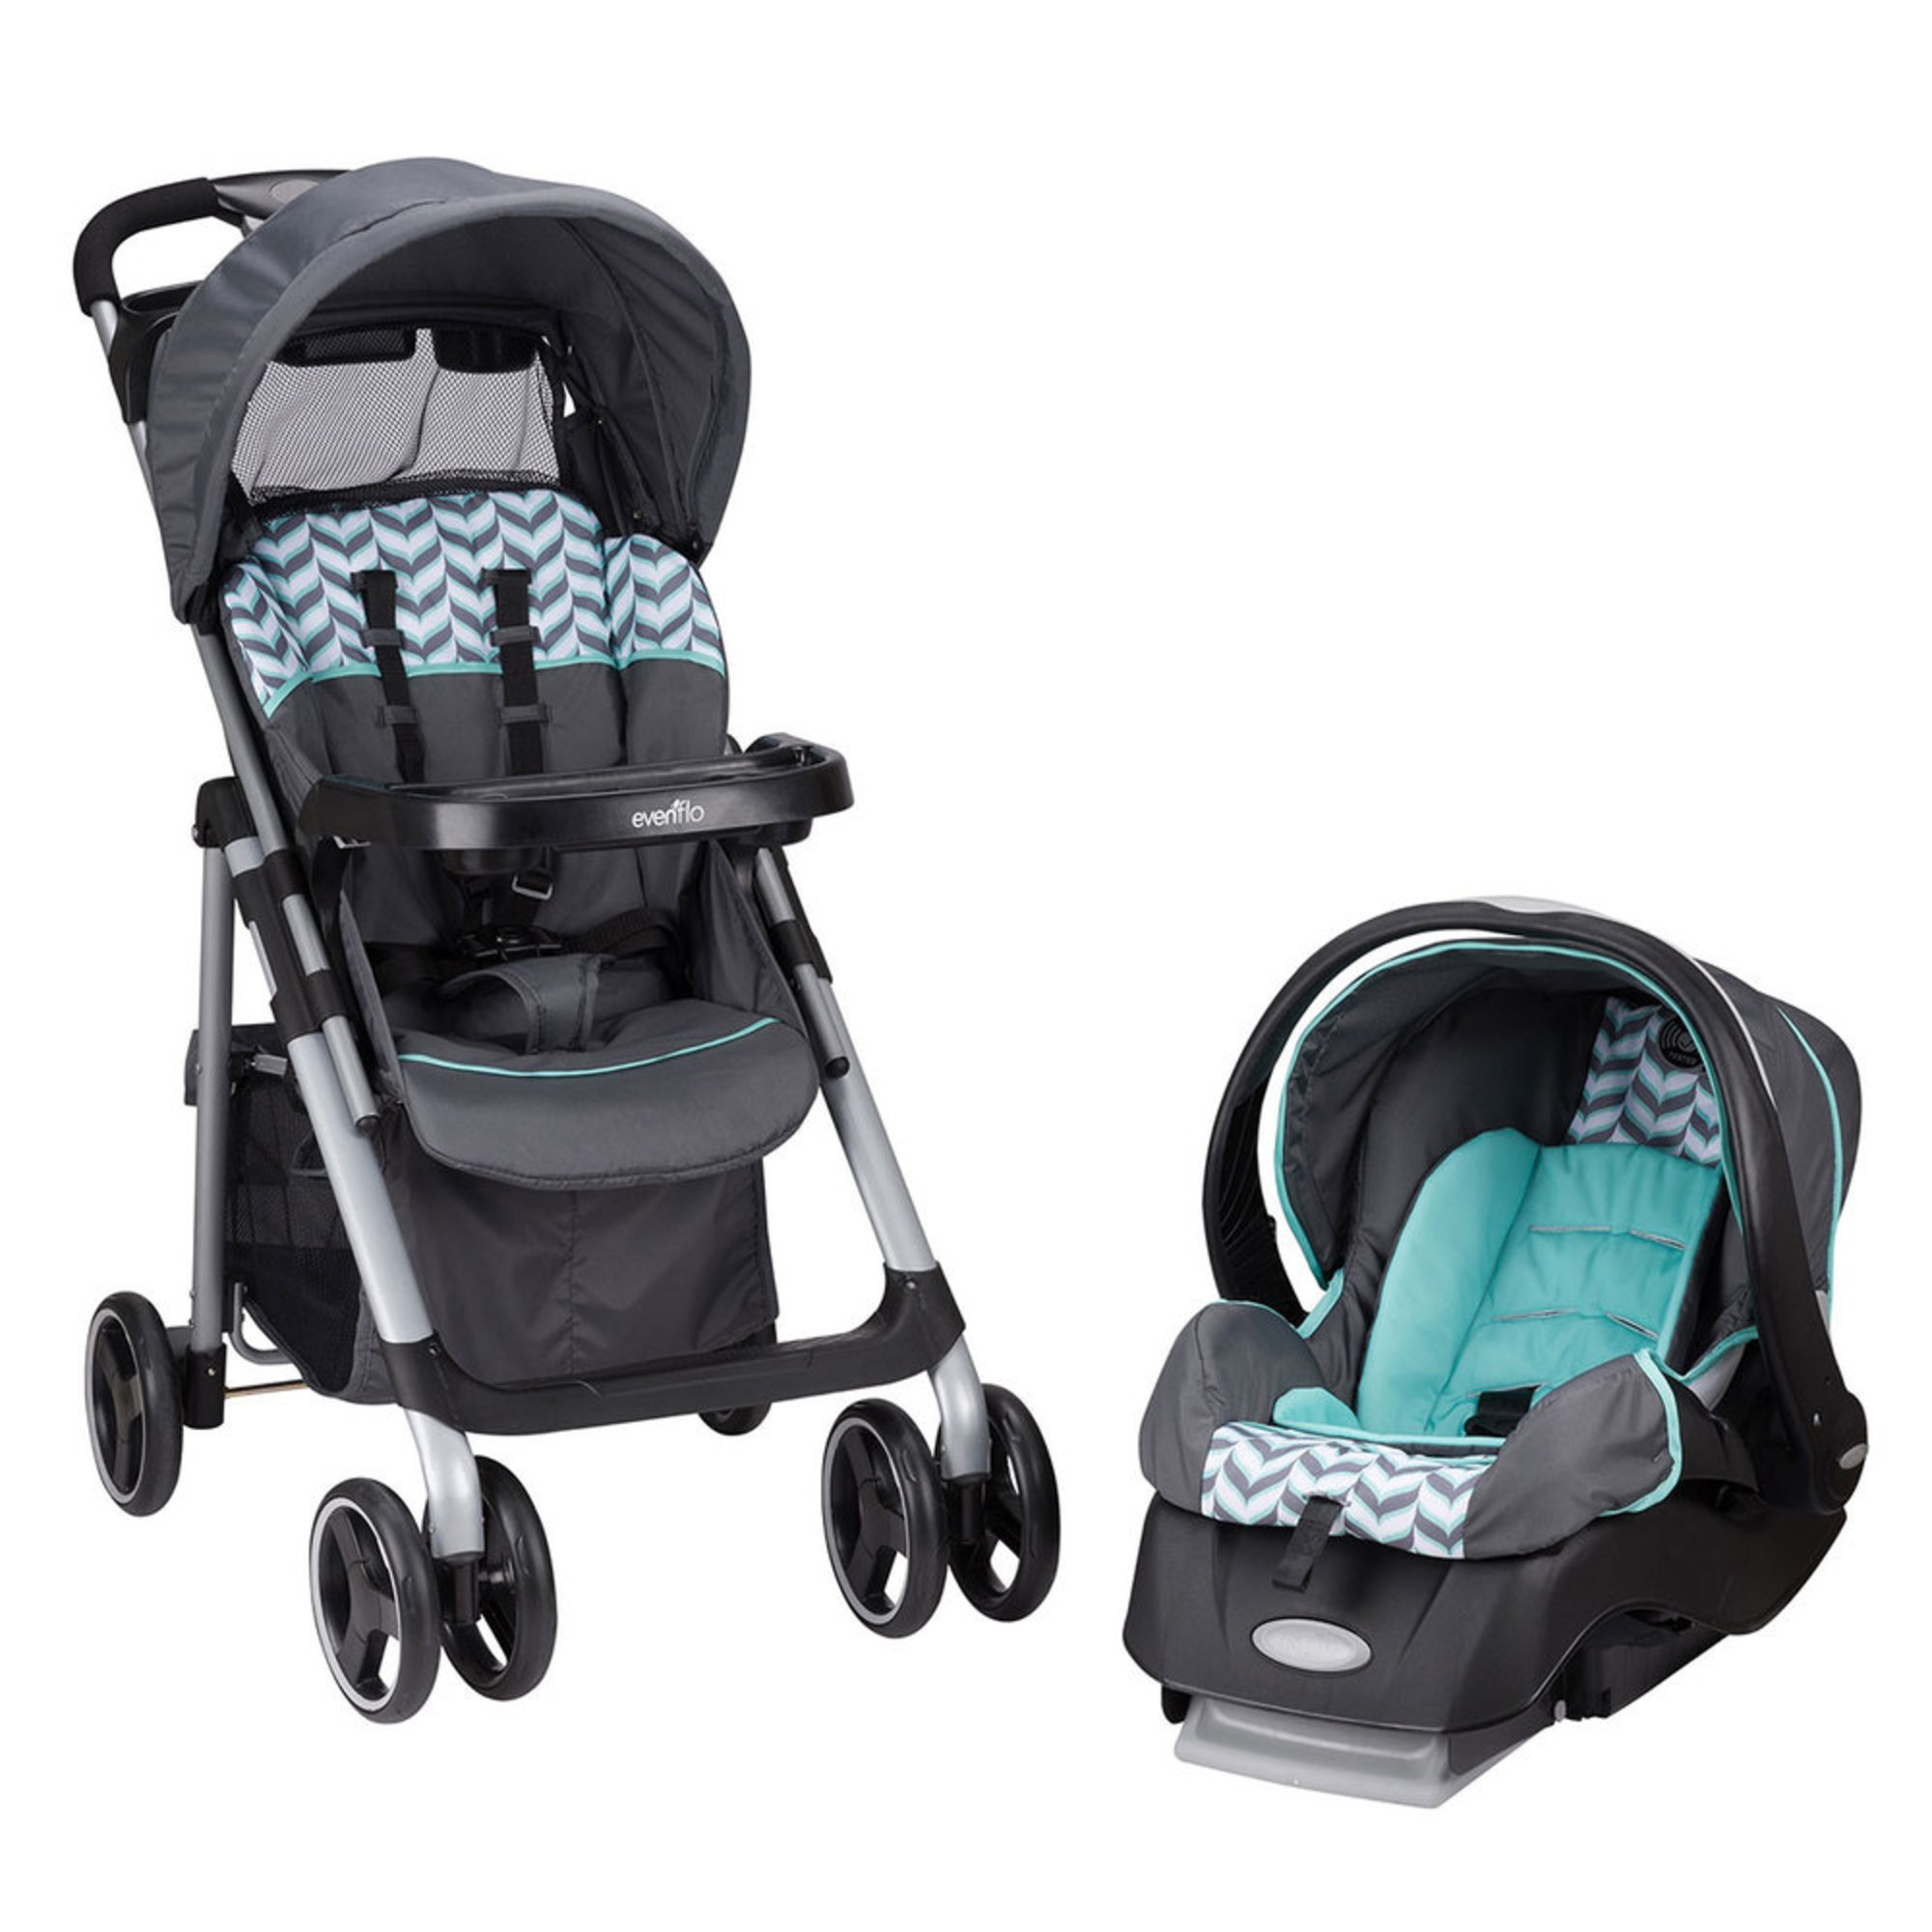 baby travel system with rotating car seat